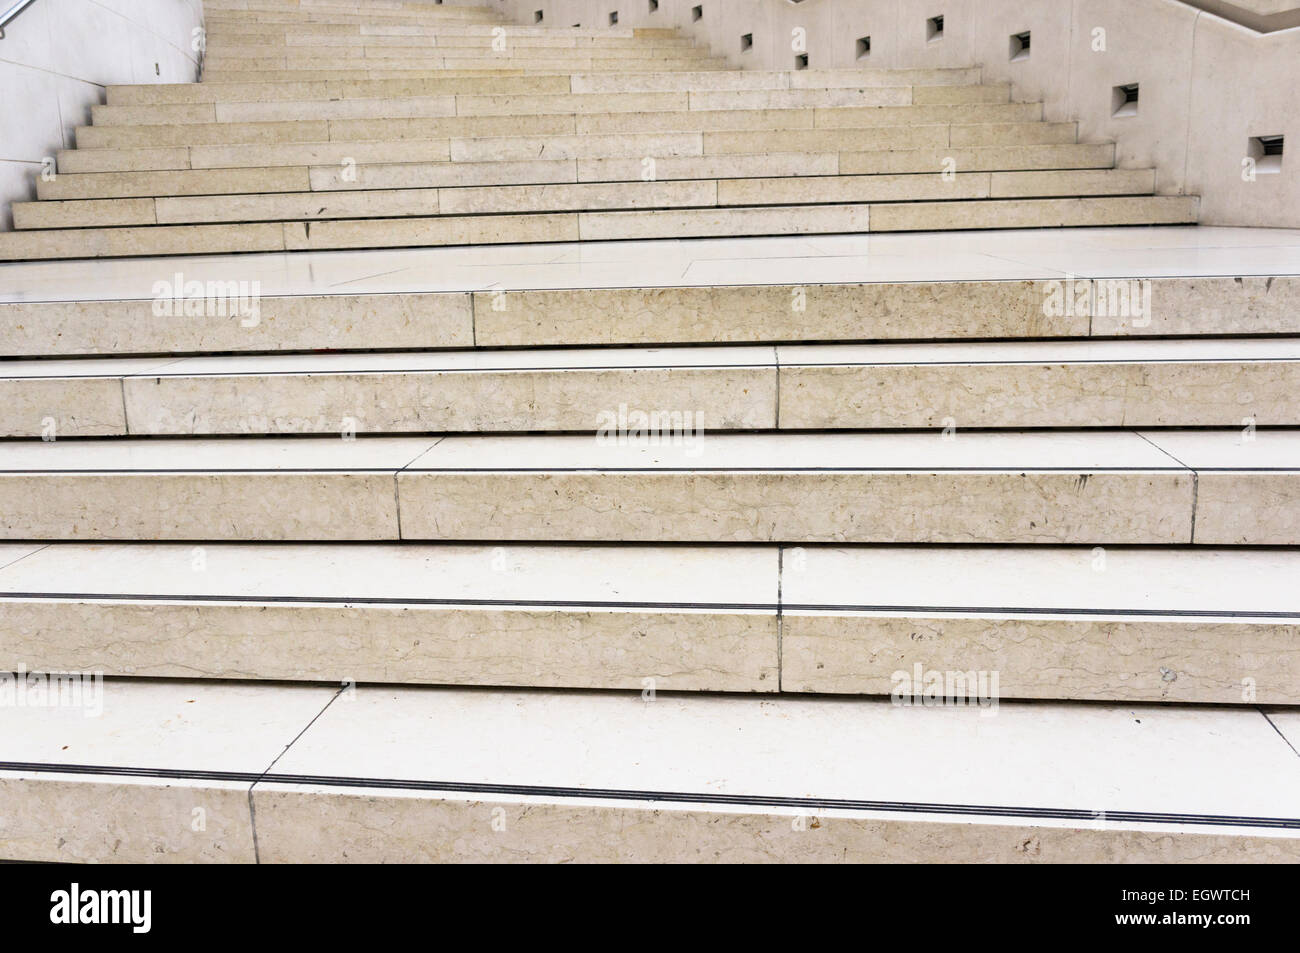 Marble steps Stock Photo